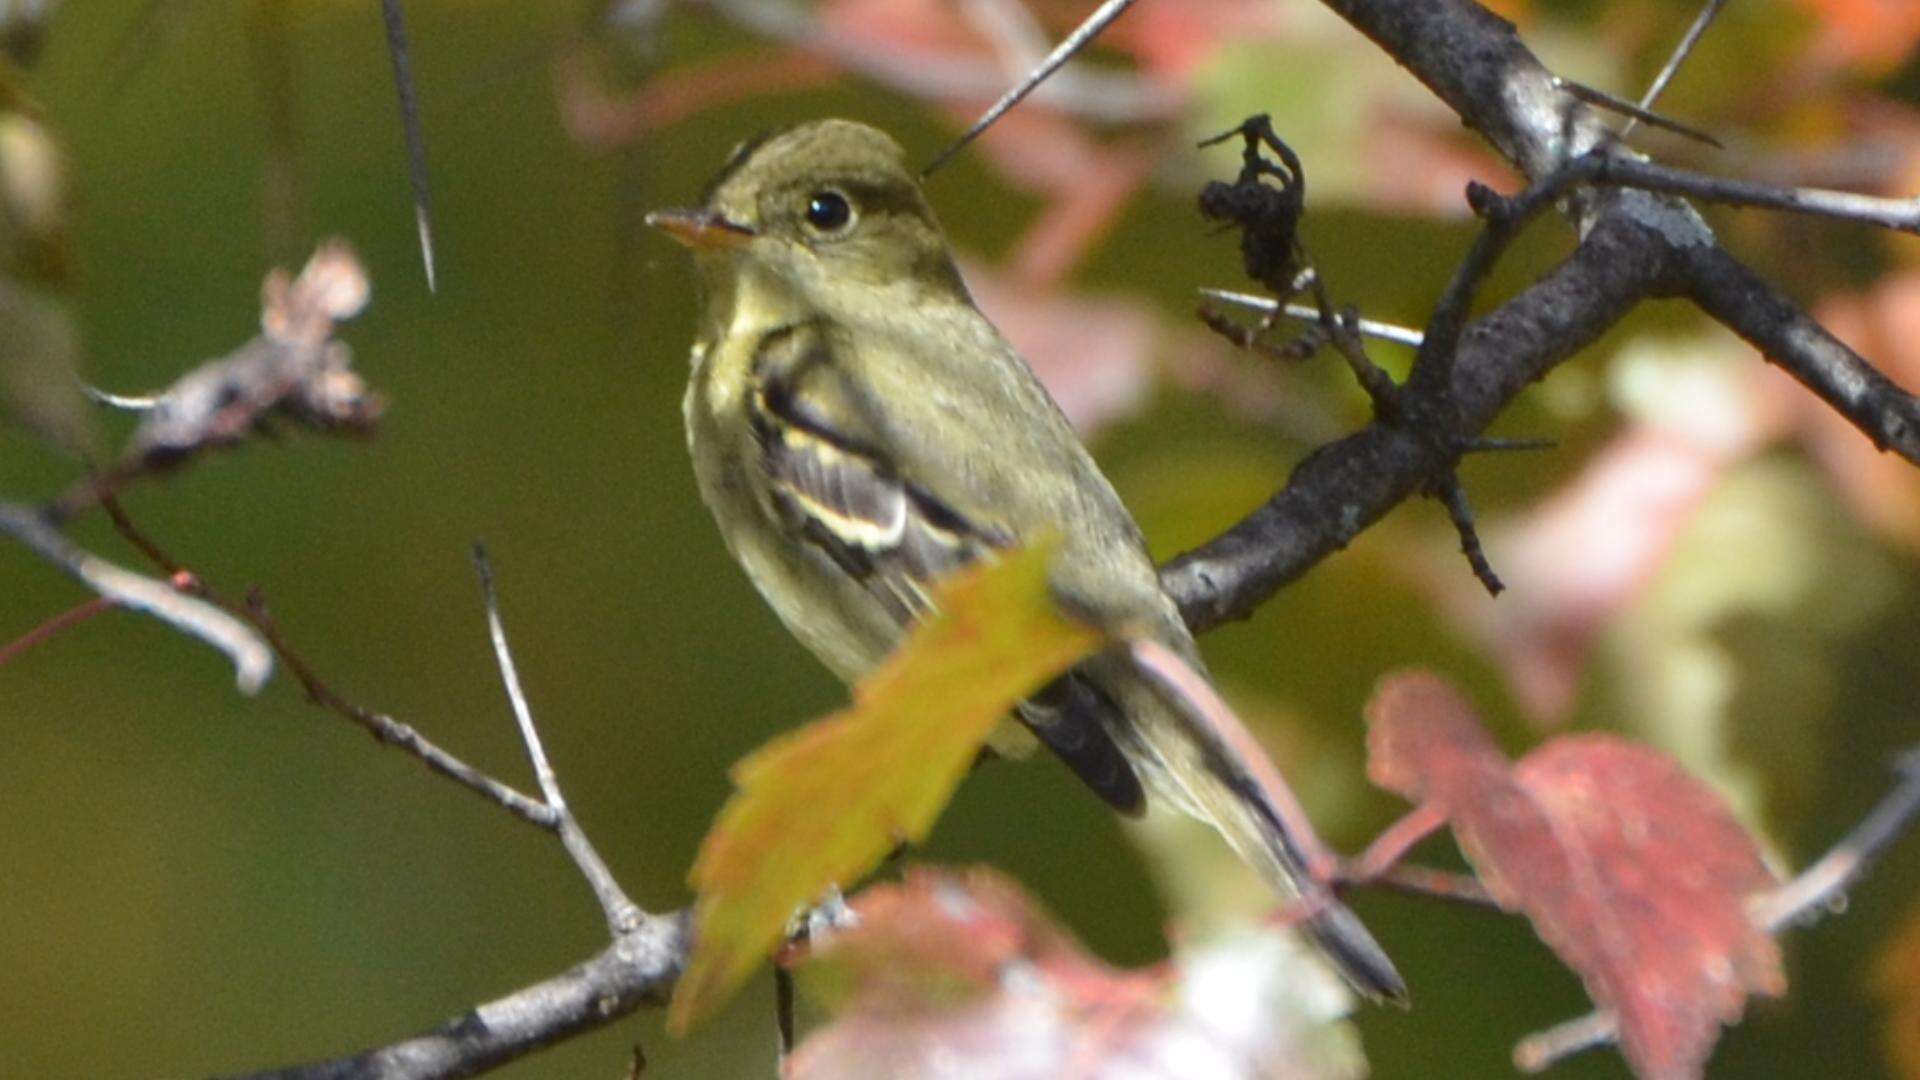 Image of Yellow-bellied Flycatcher